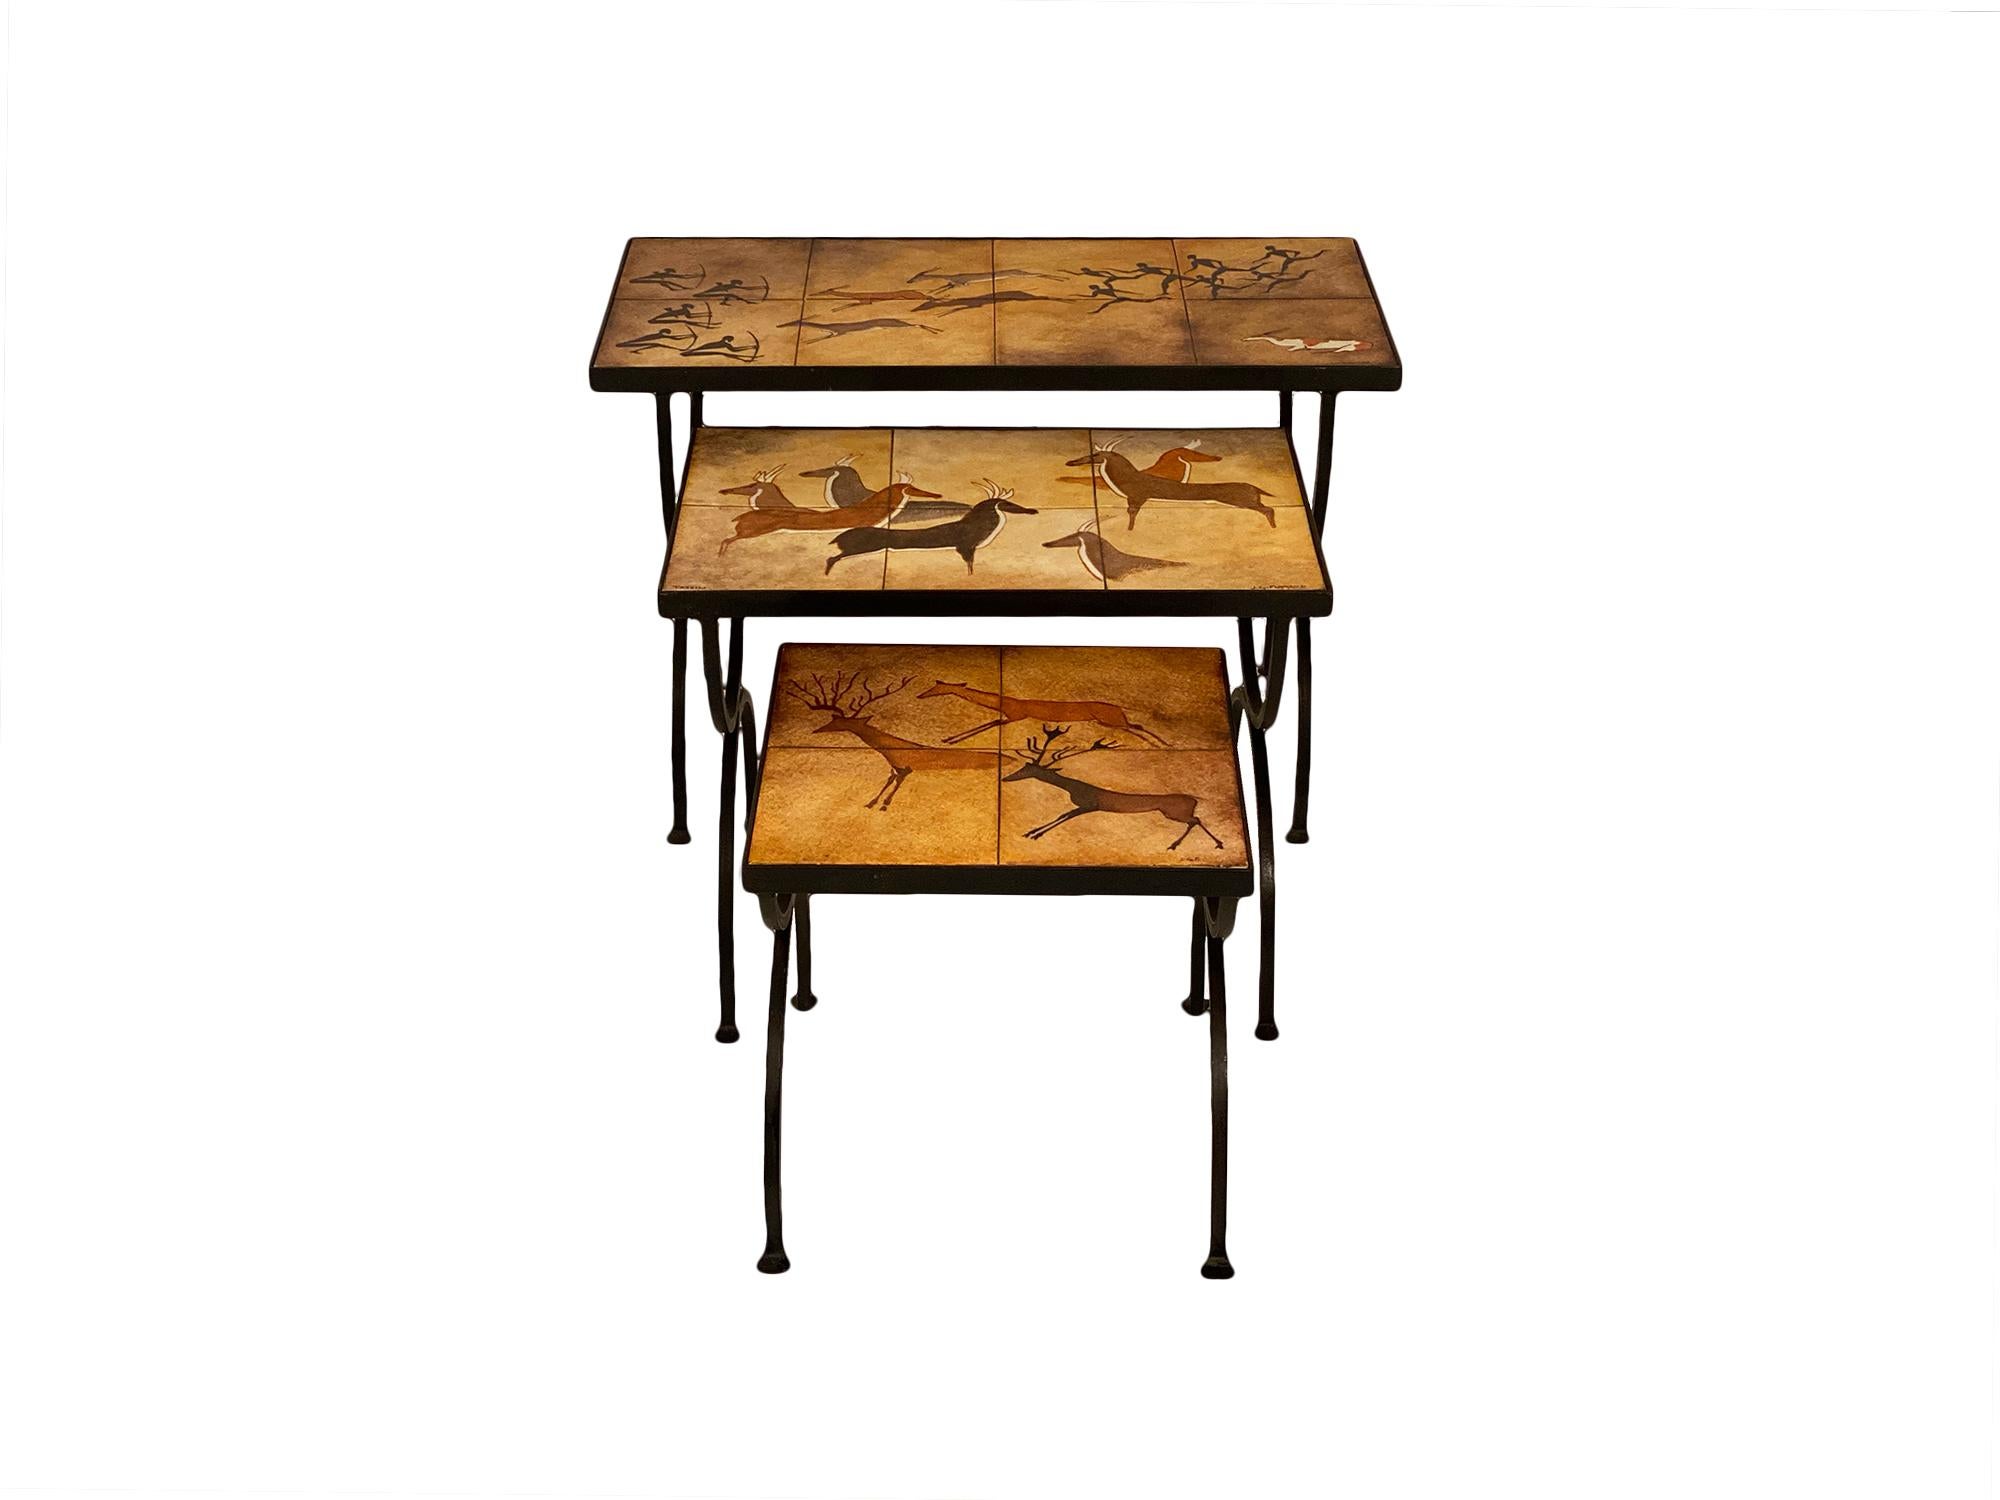 Set of nesting tables featuring a polychrome original work signed JG Flamand. The terracotta tiles that form the tops represent hunting scenes in a cave painting style. The bases are hand-hammered forged iron.